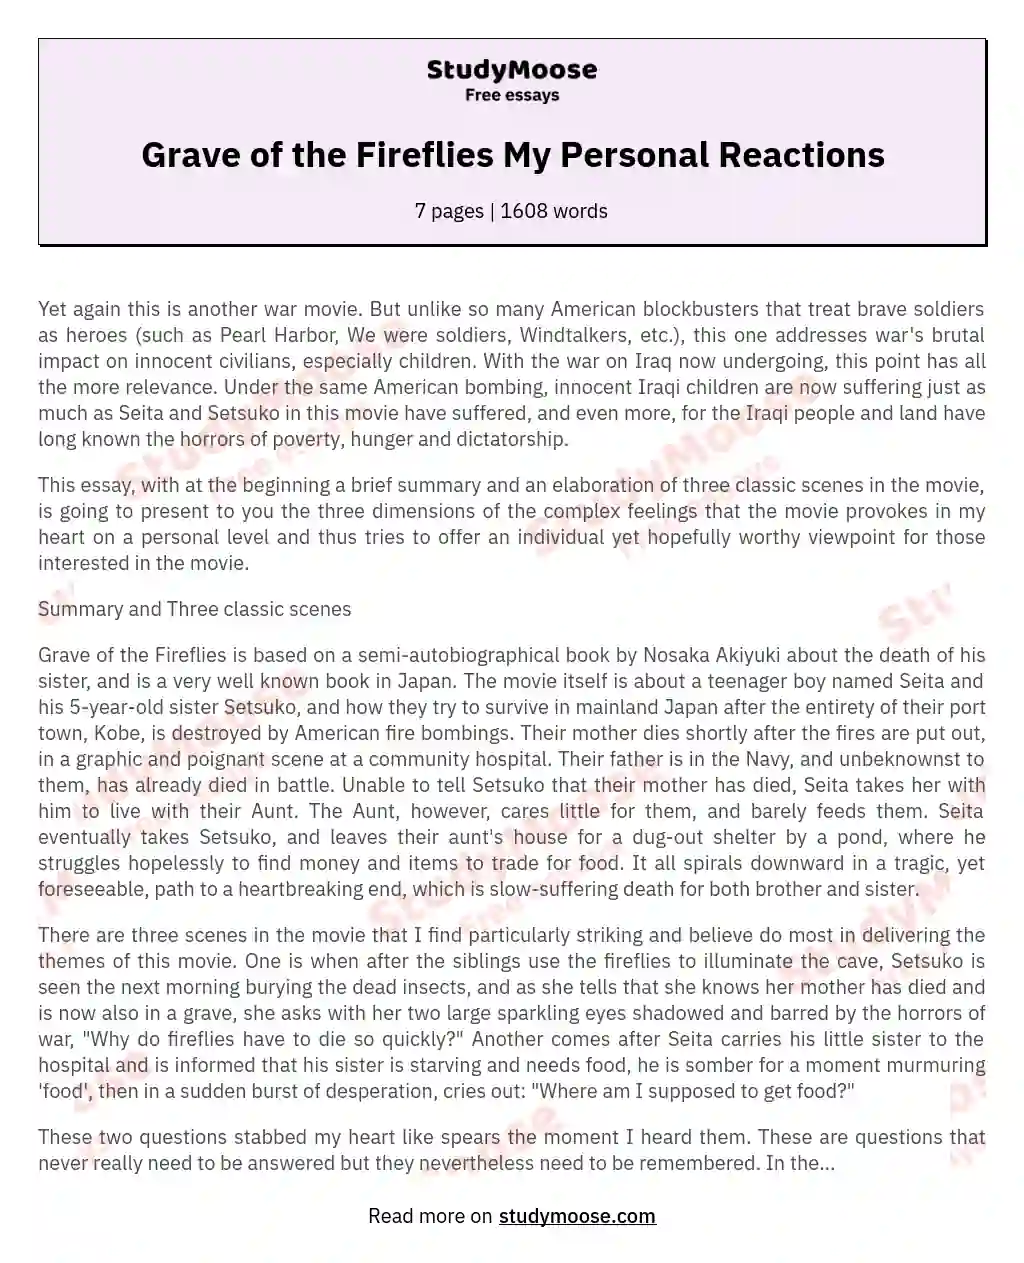 Grave of the Fireflies My Personal Reactions essay